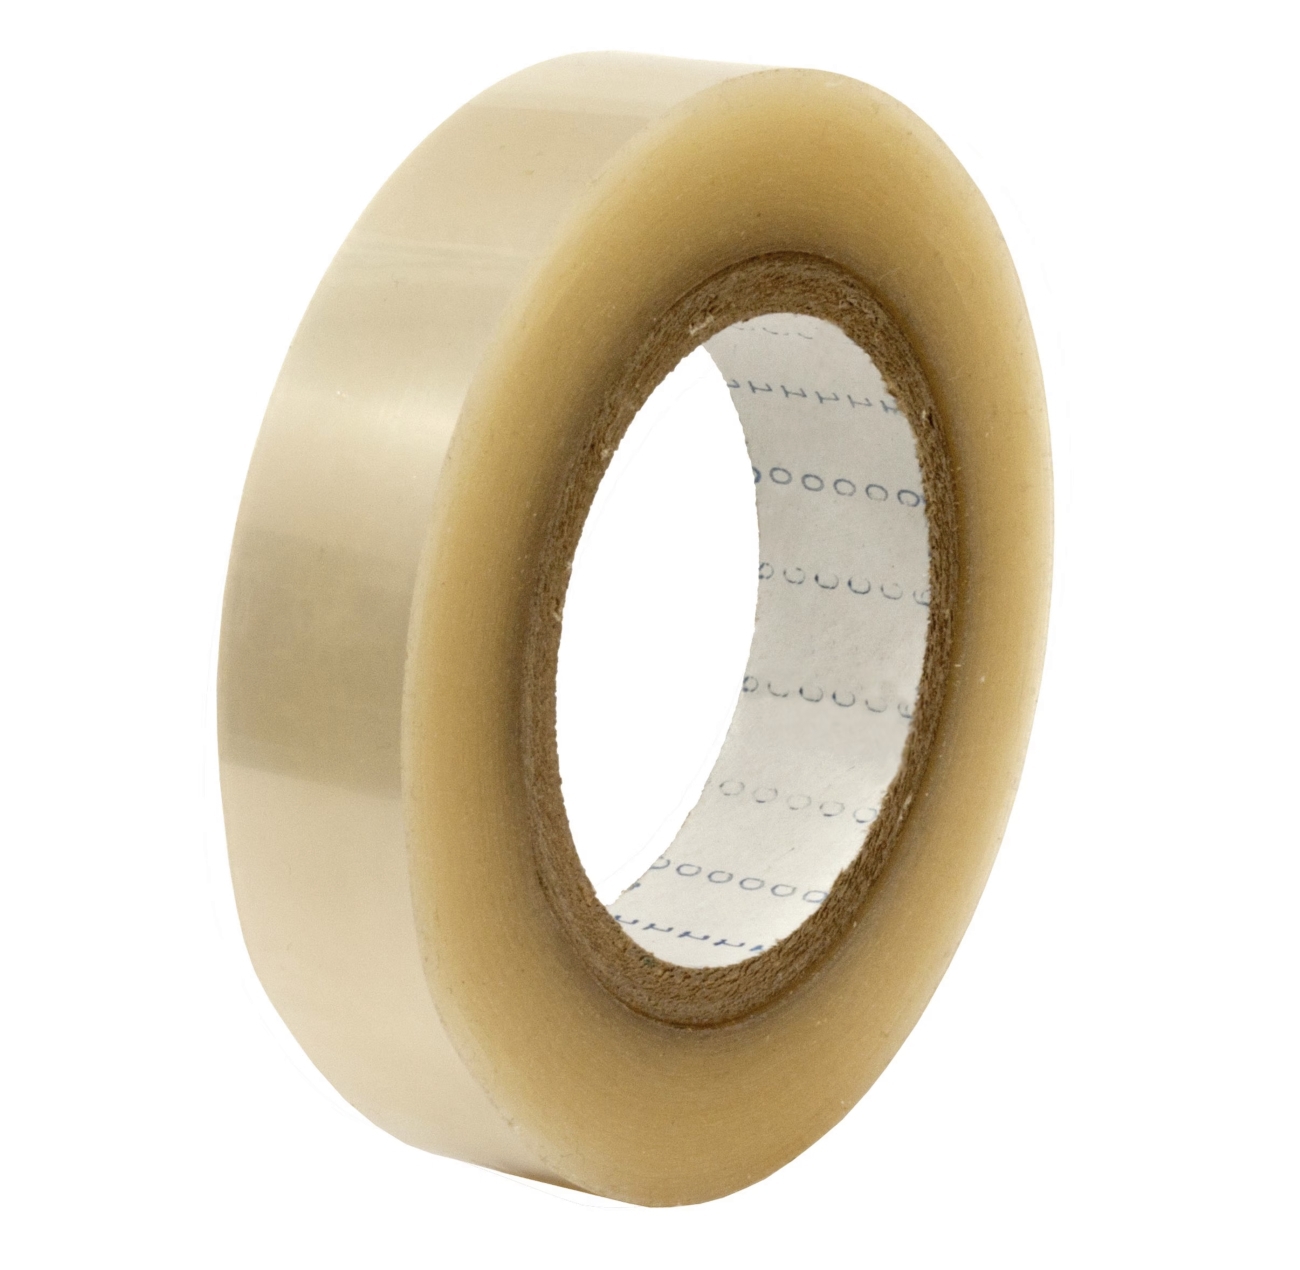 S-K-S double-sided adhesive tape with polyester backing 960, transparent, 19 mm x 66 m, silicone adhesive, 0.085 mm